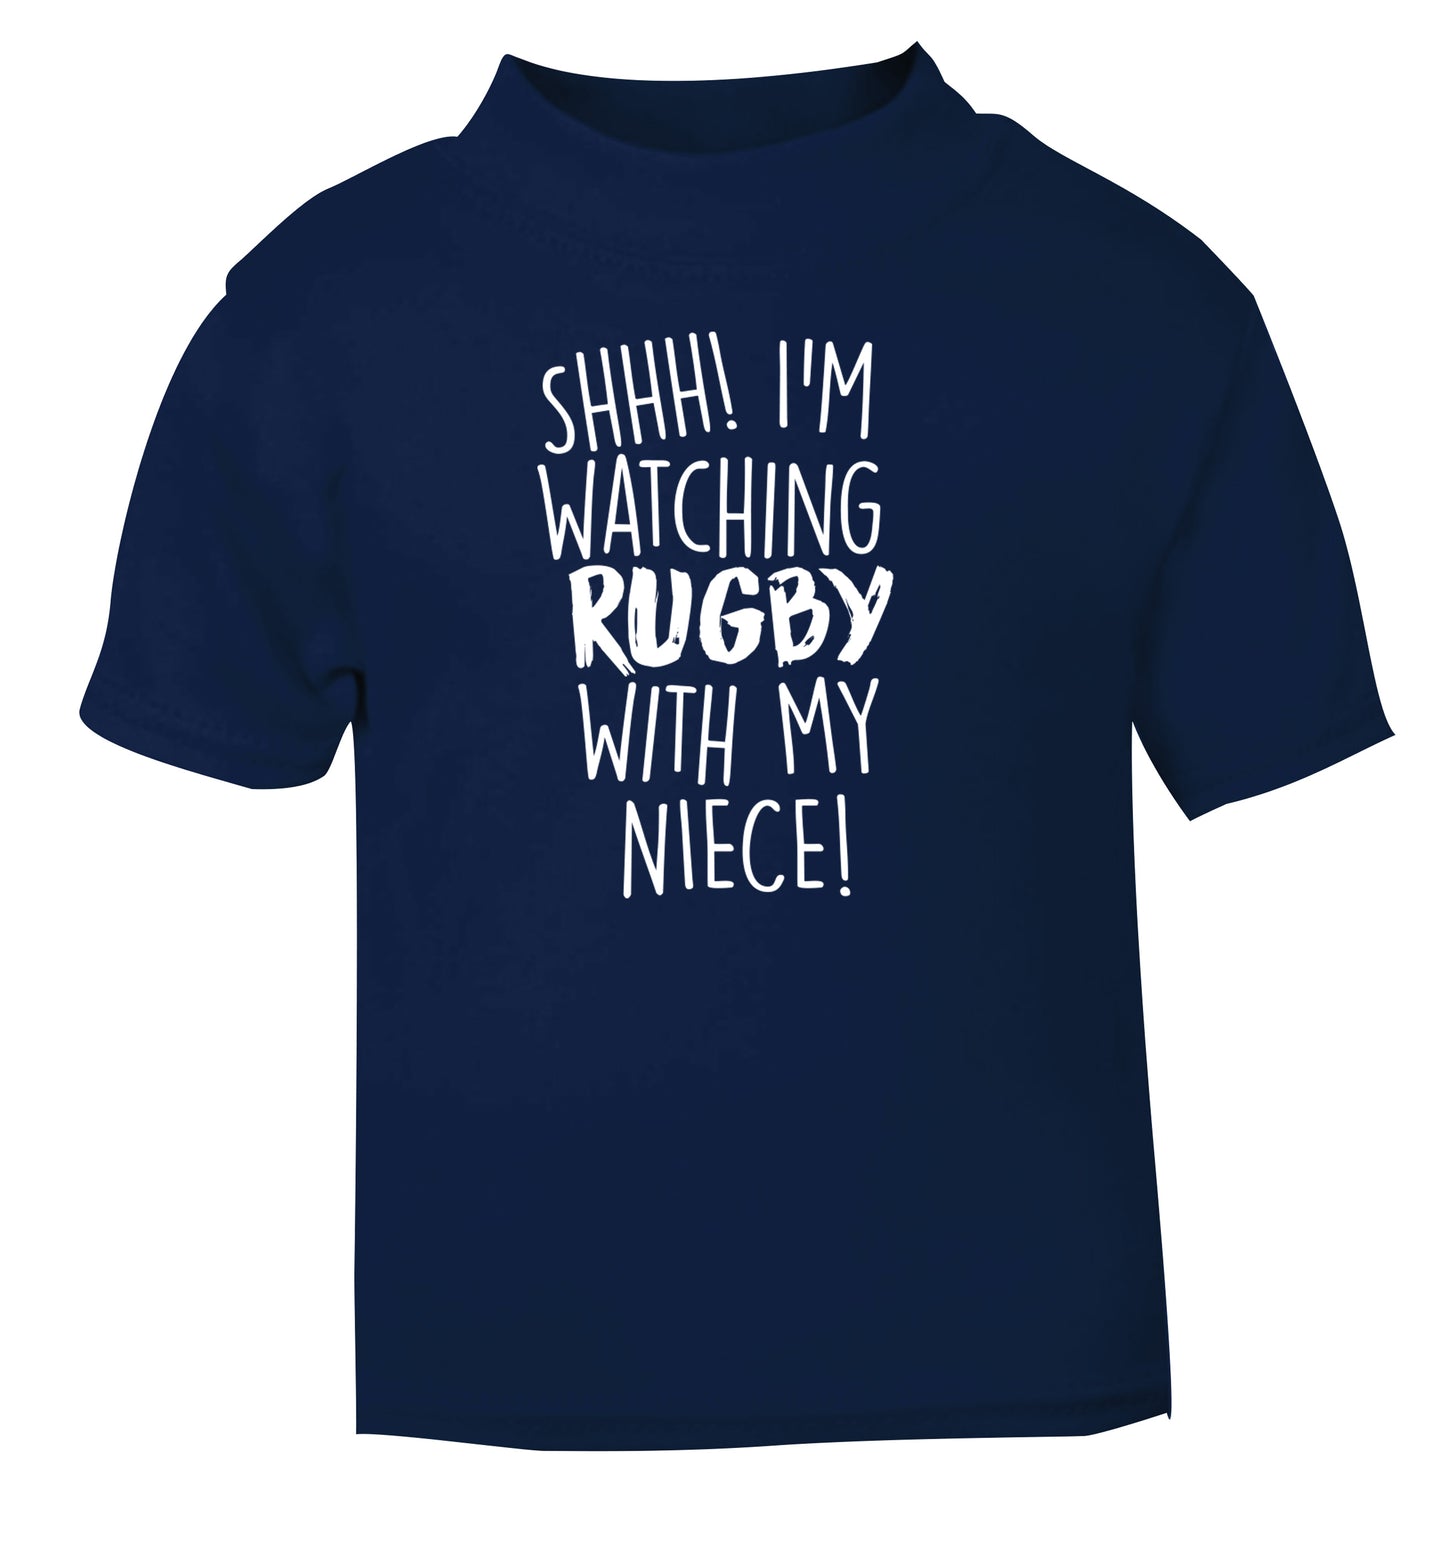 Shh.. I'm watching rugby with my niece navy Baby Toddler Tshirt 2 Years